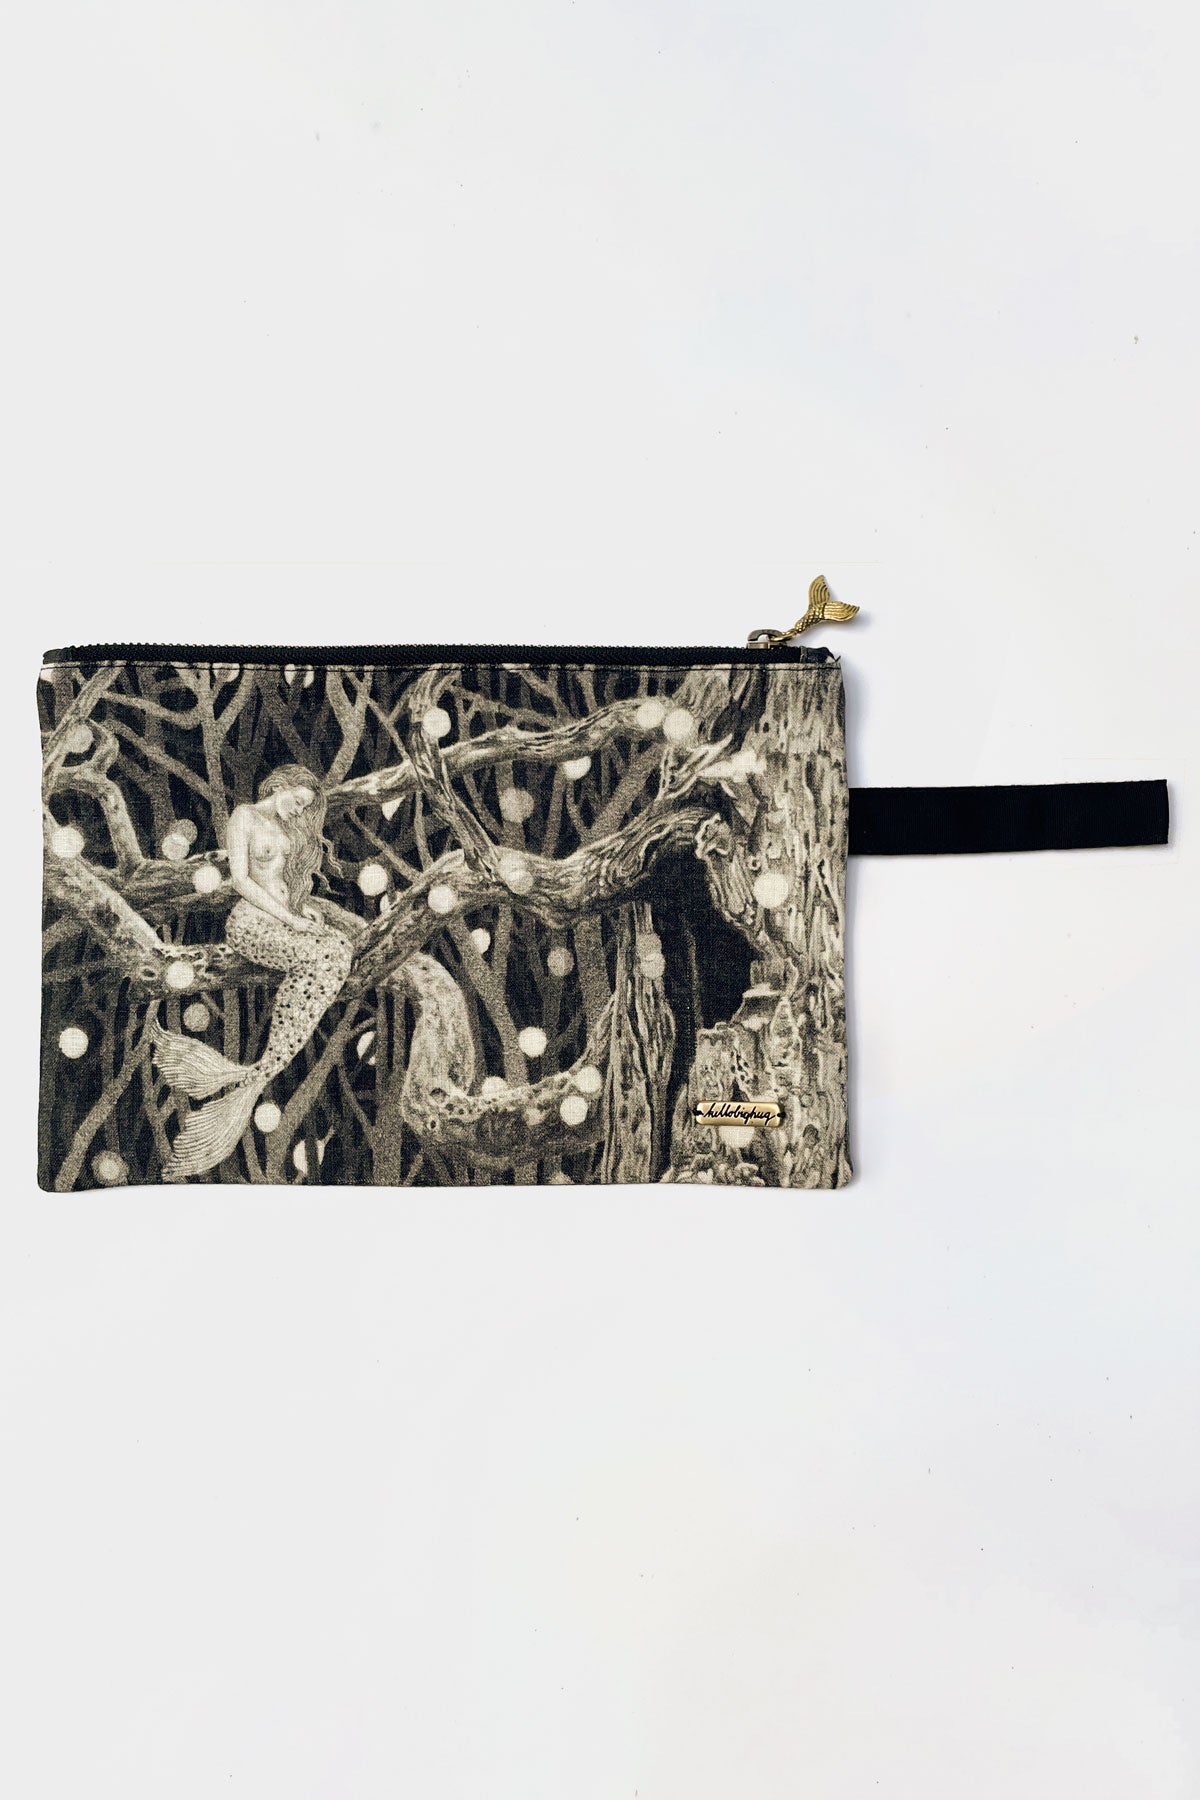 Load image into Gallery viewer, The multifunctional ‘Mermaid Pouch’ is the perfect companion for storing all your essentials - stationary, travel accessories, make up, parenting gear, … everything really, for every day life or special occasions! On the front and back it features a dreamy pencil illustration by Suflanda „After The Storm“
